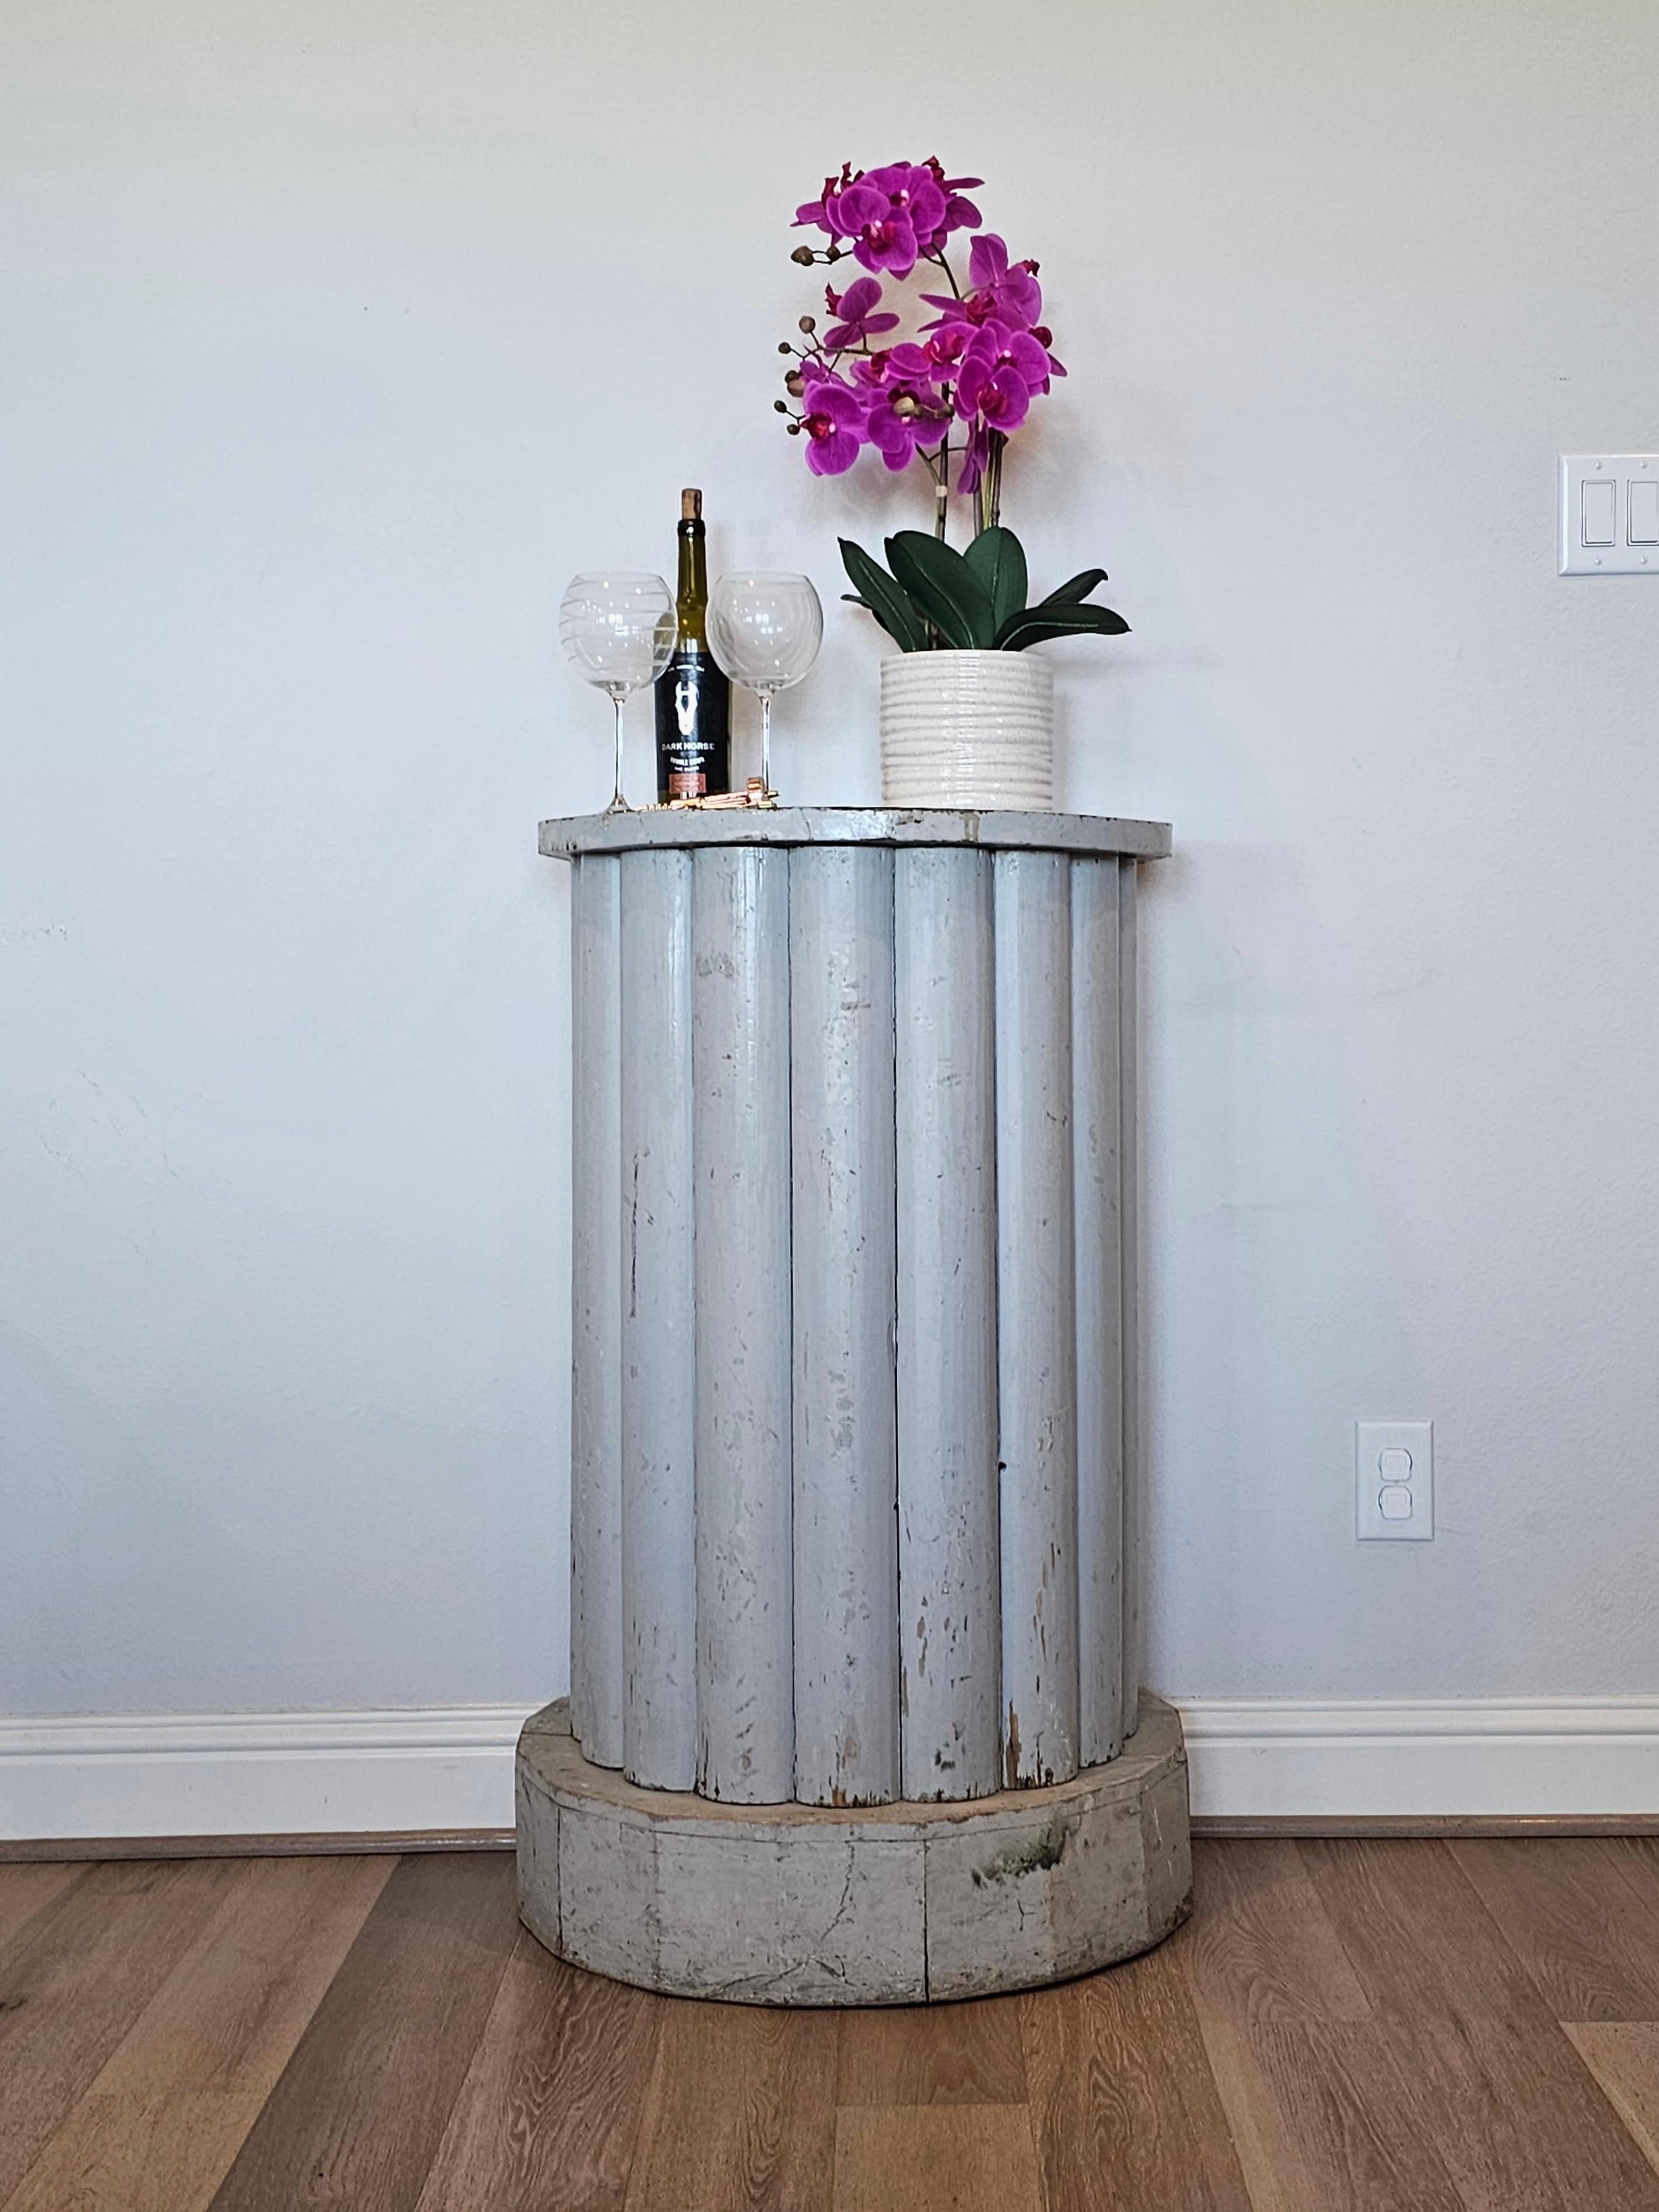 Add sophisticated antique character, elegant rustic warmth, and timeless classic style with this lovely, most likely one-of-a-kind, French antique architectural column pedestal with beautifully aged heavily distressed chippy paint patina. circa